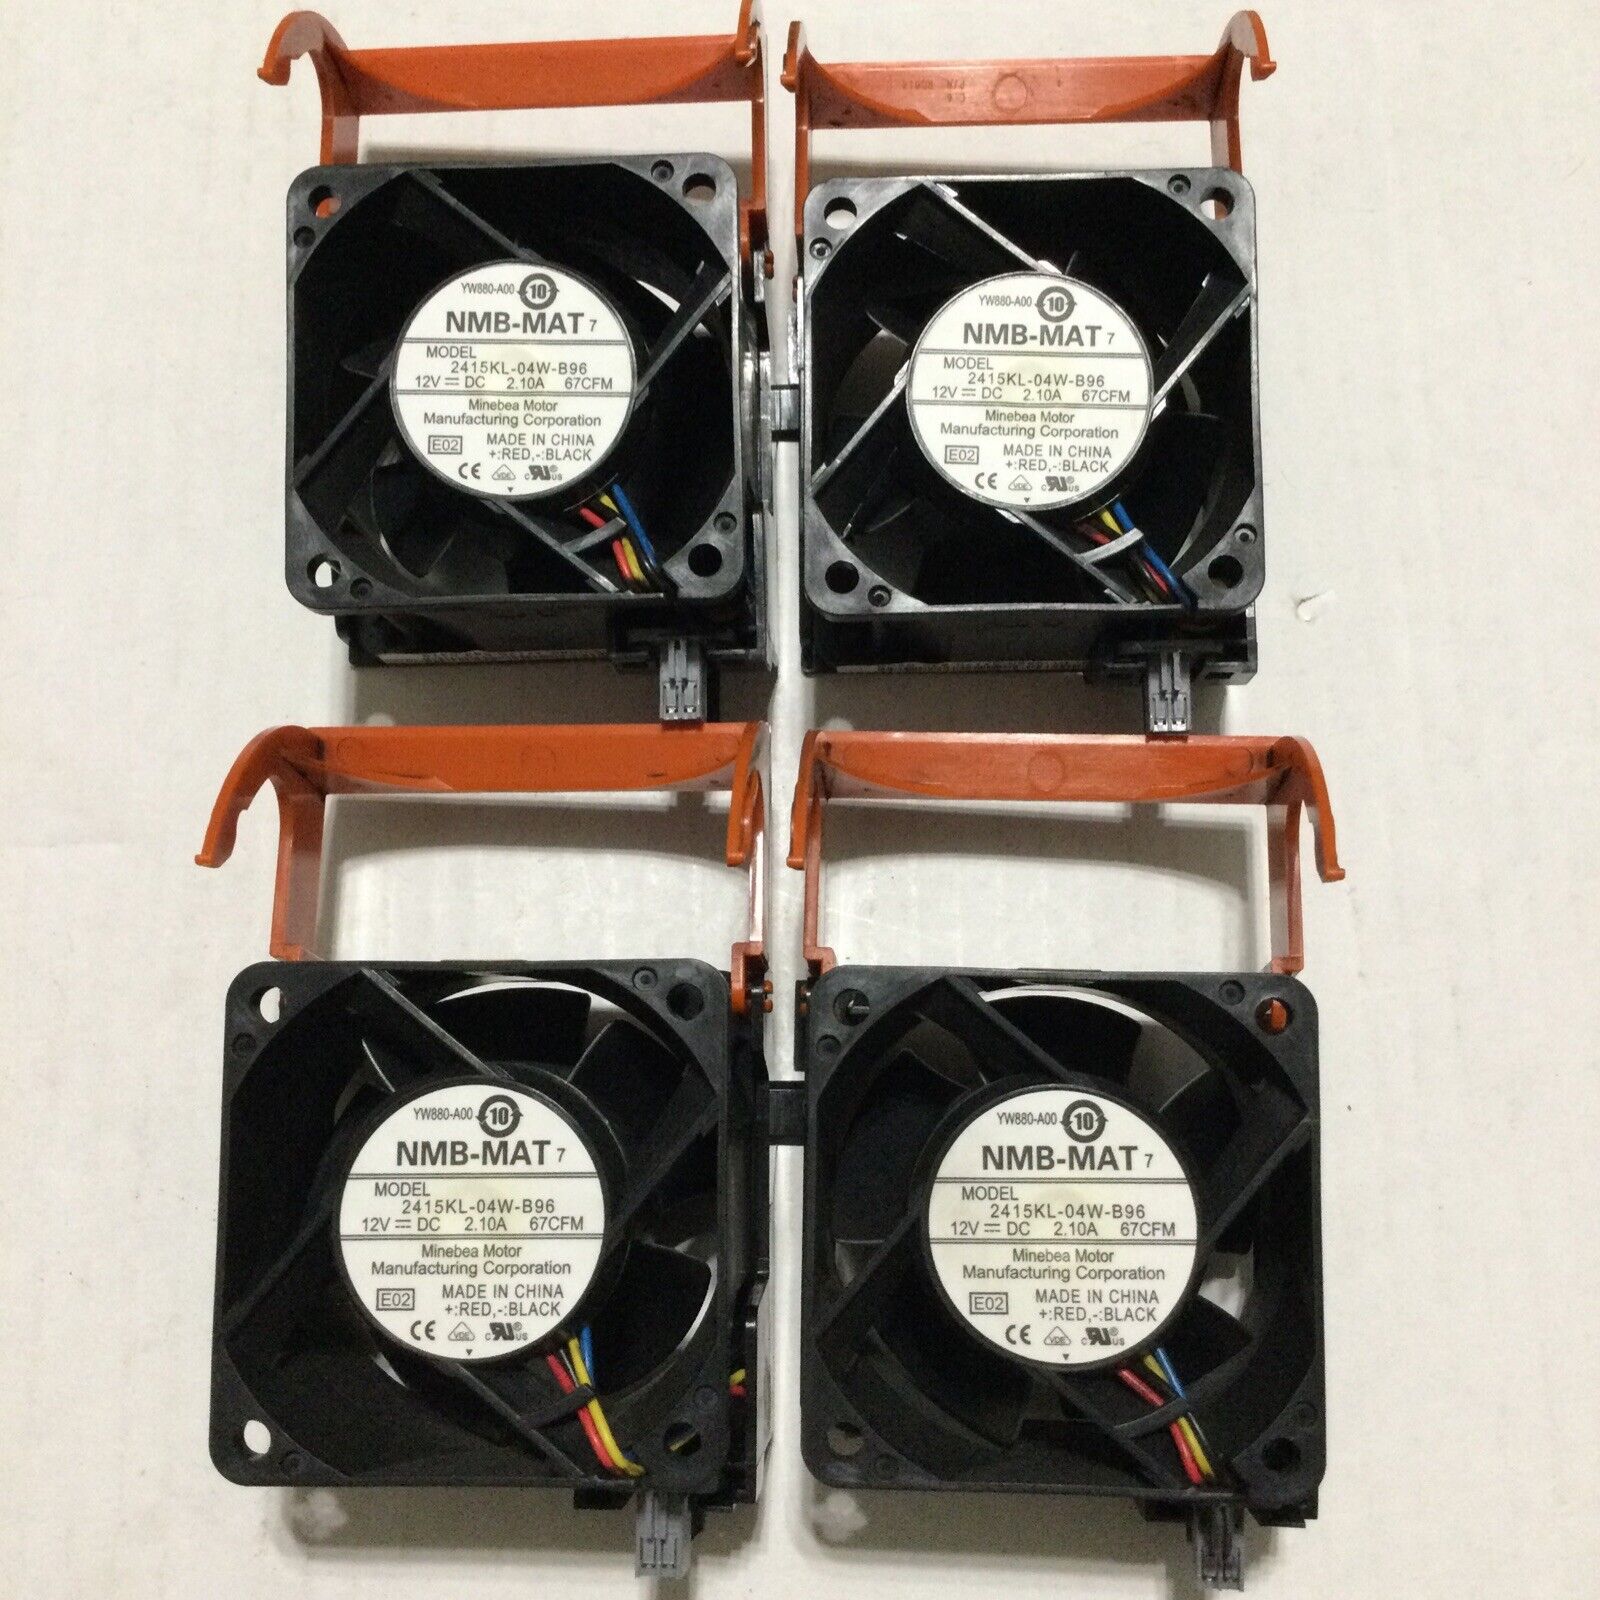 4 Dell PowerEdge 2950 SAN ACE 60 12V YW880-A00 60mm Cooling Fan 9G0612P1J0318